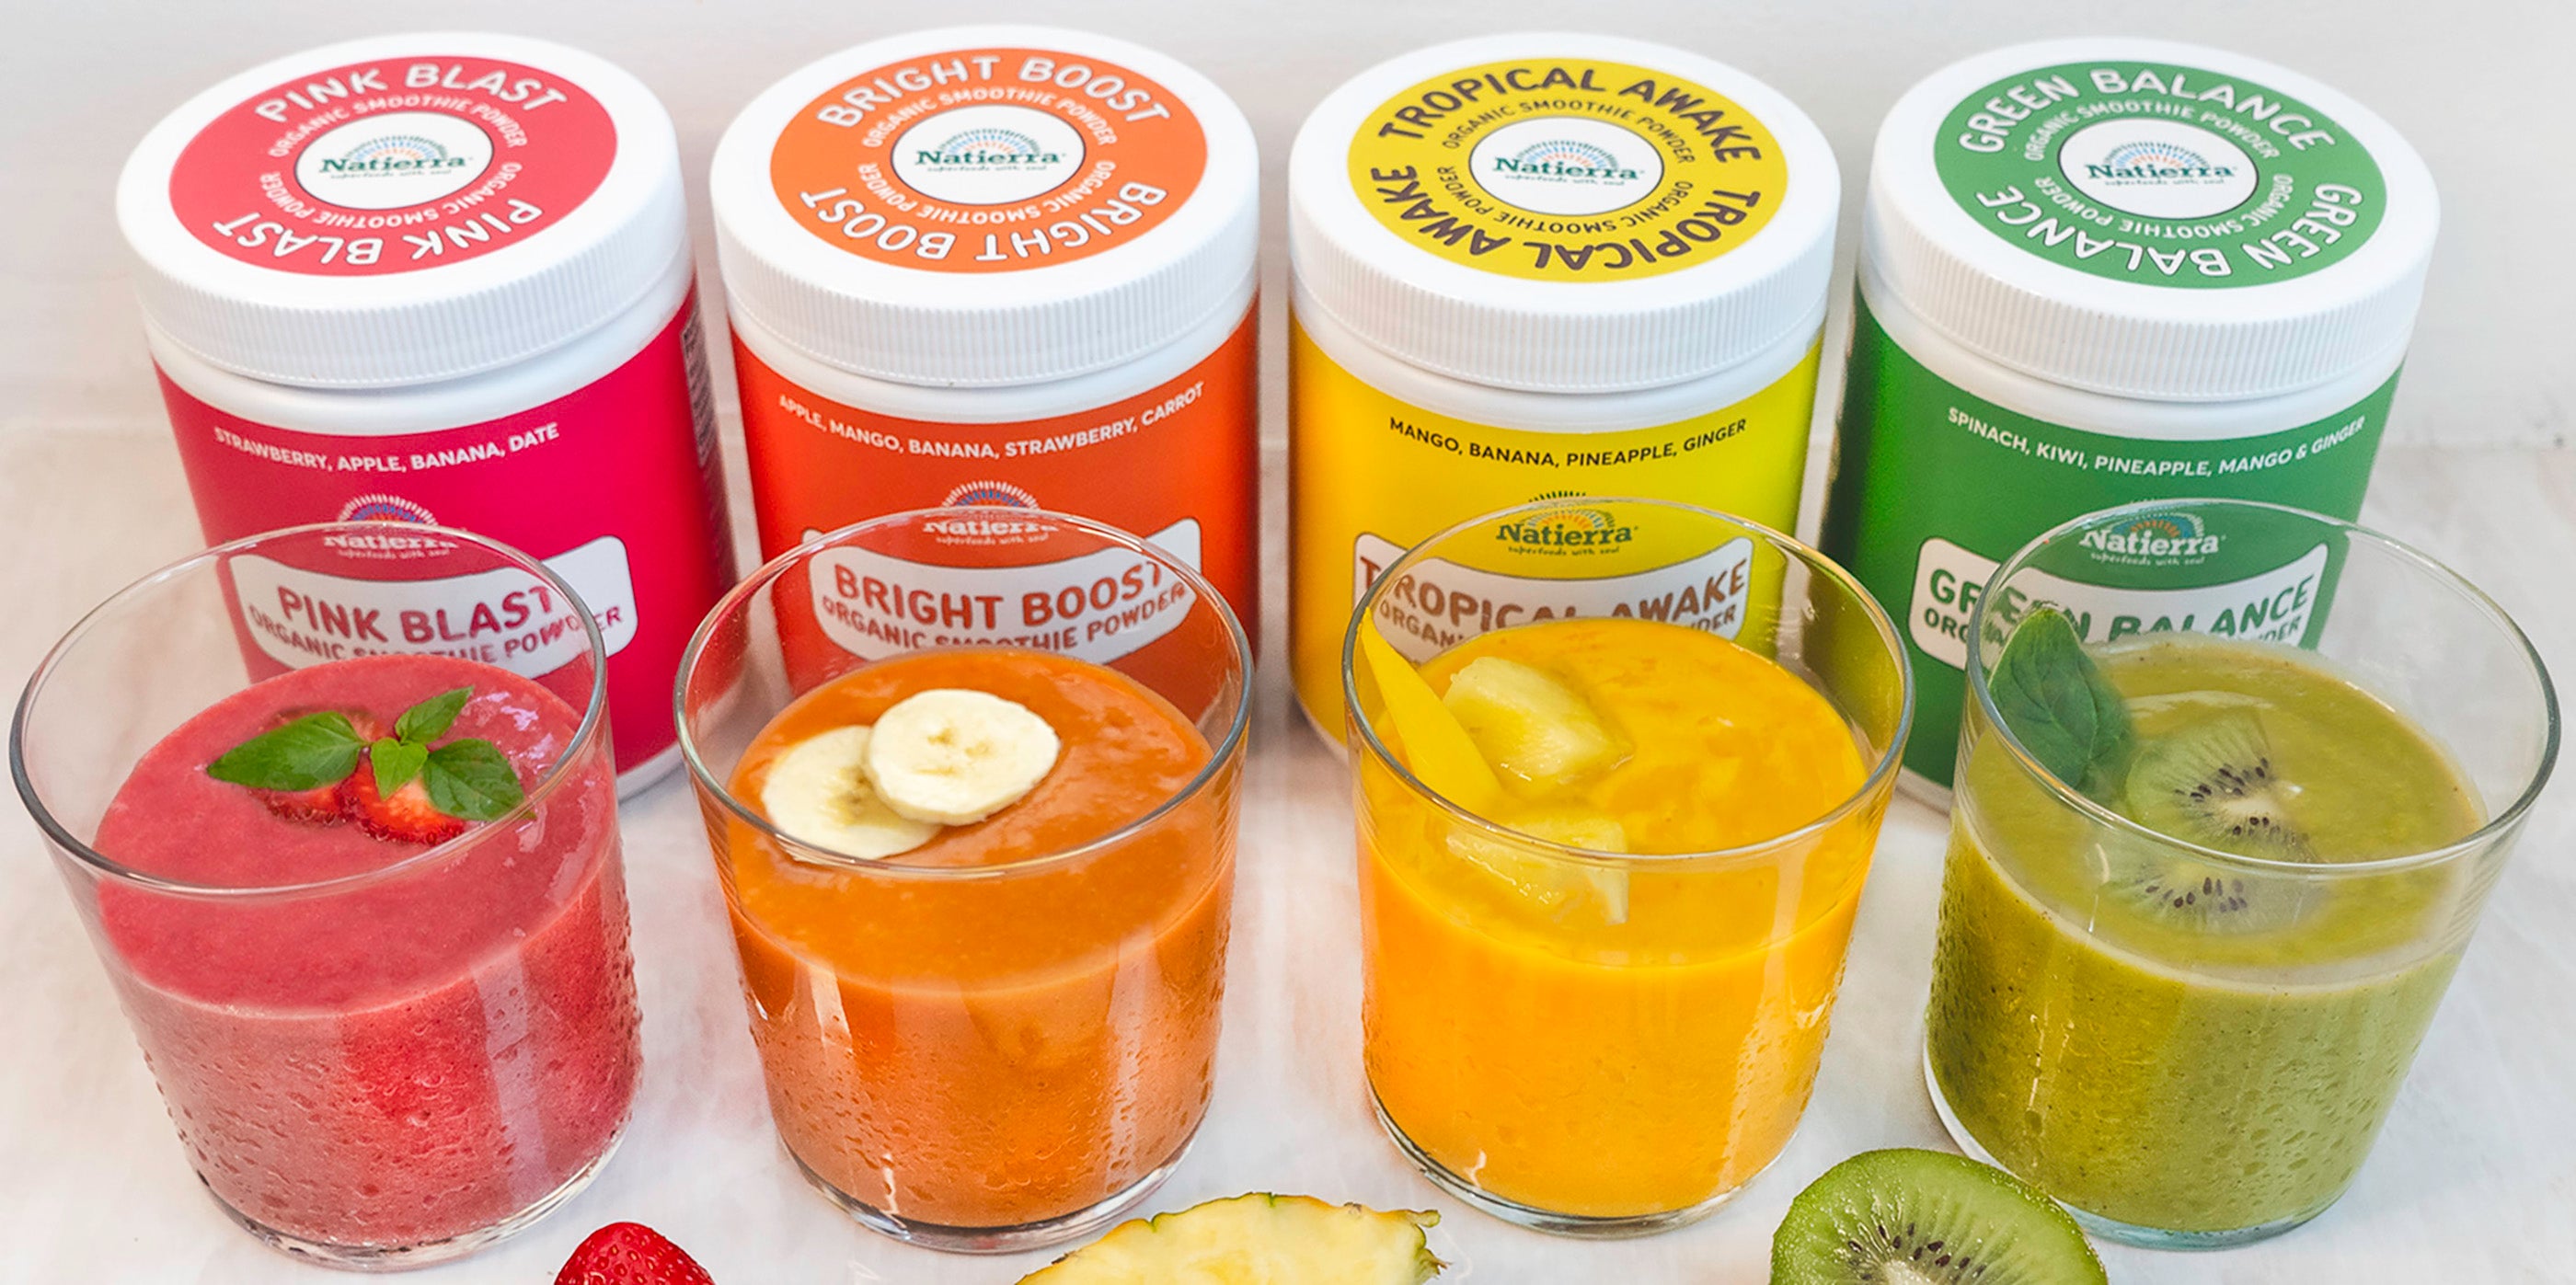 Four colorful smoothie drinks and Pink Blast, Bright Boost, Tropical Awake and Green Balance smoothie jar in background.